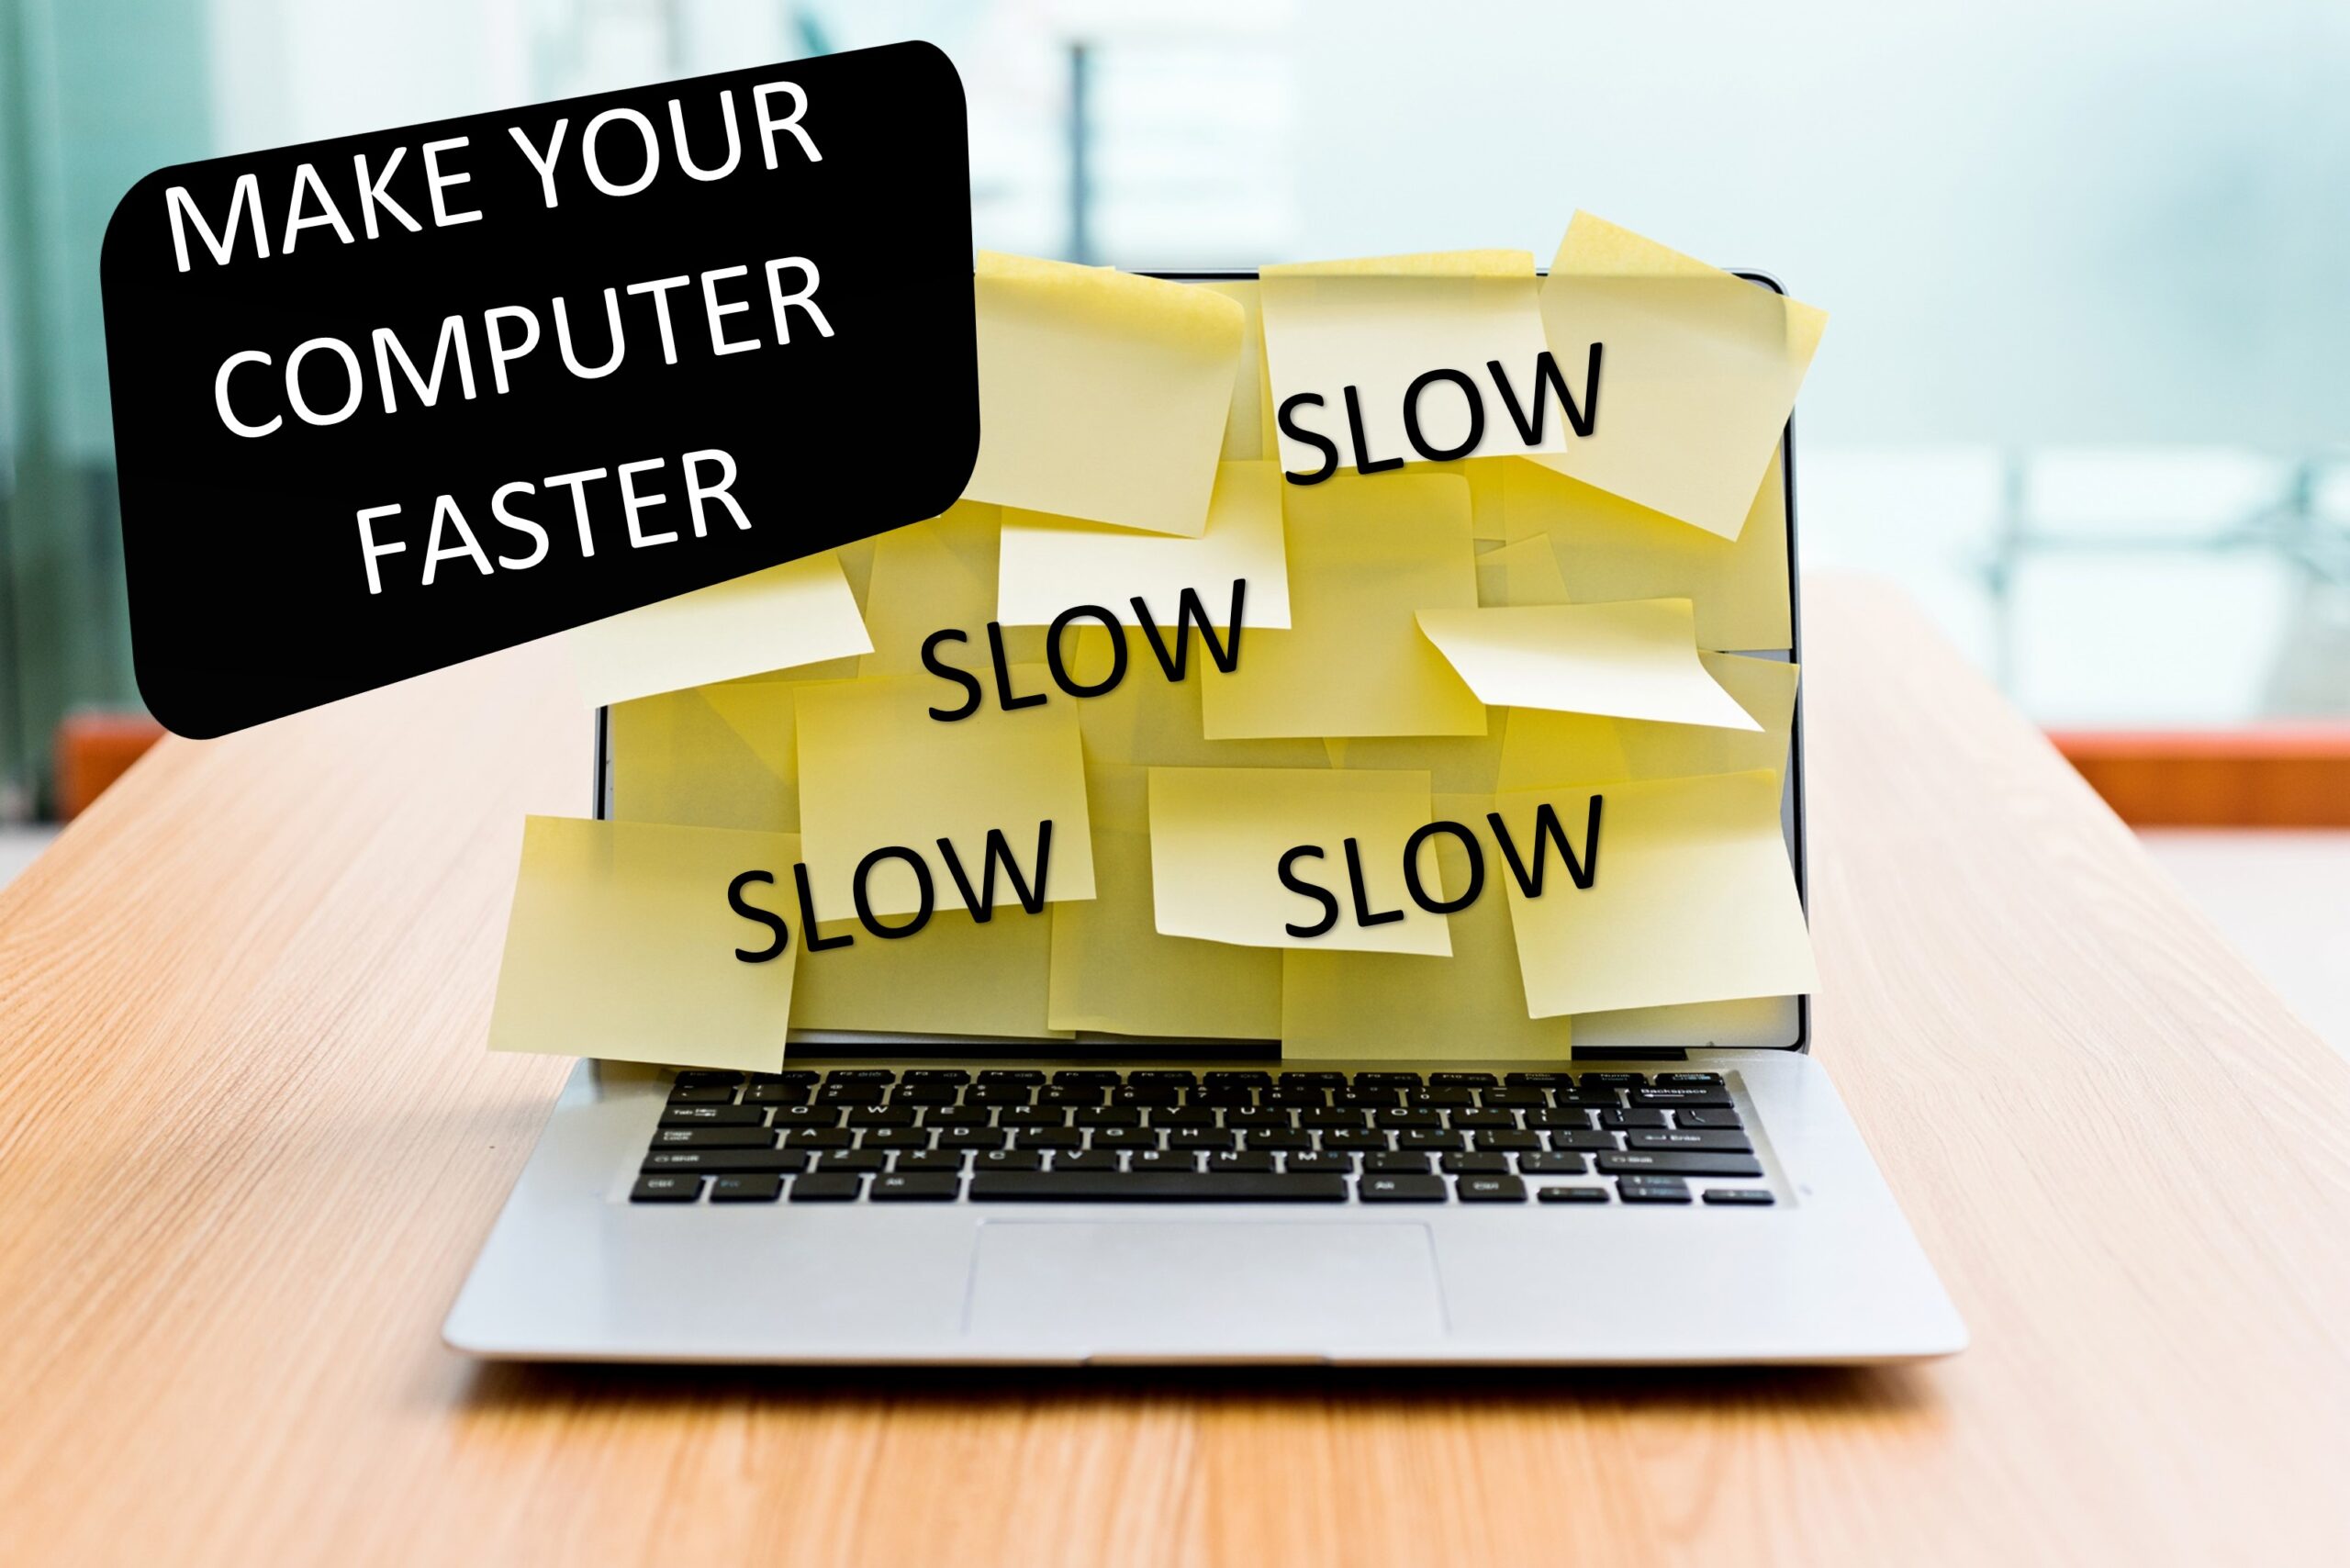 Tips for a faster computer